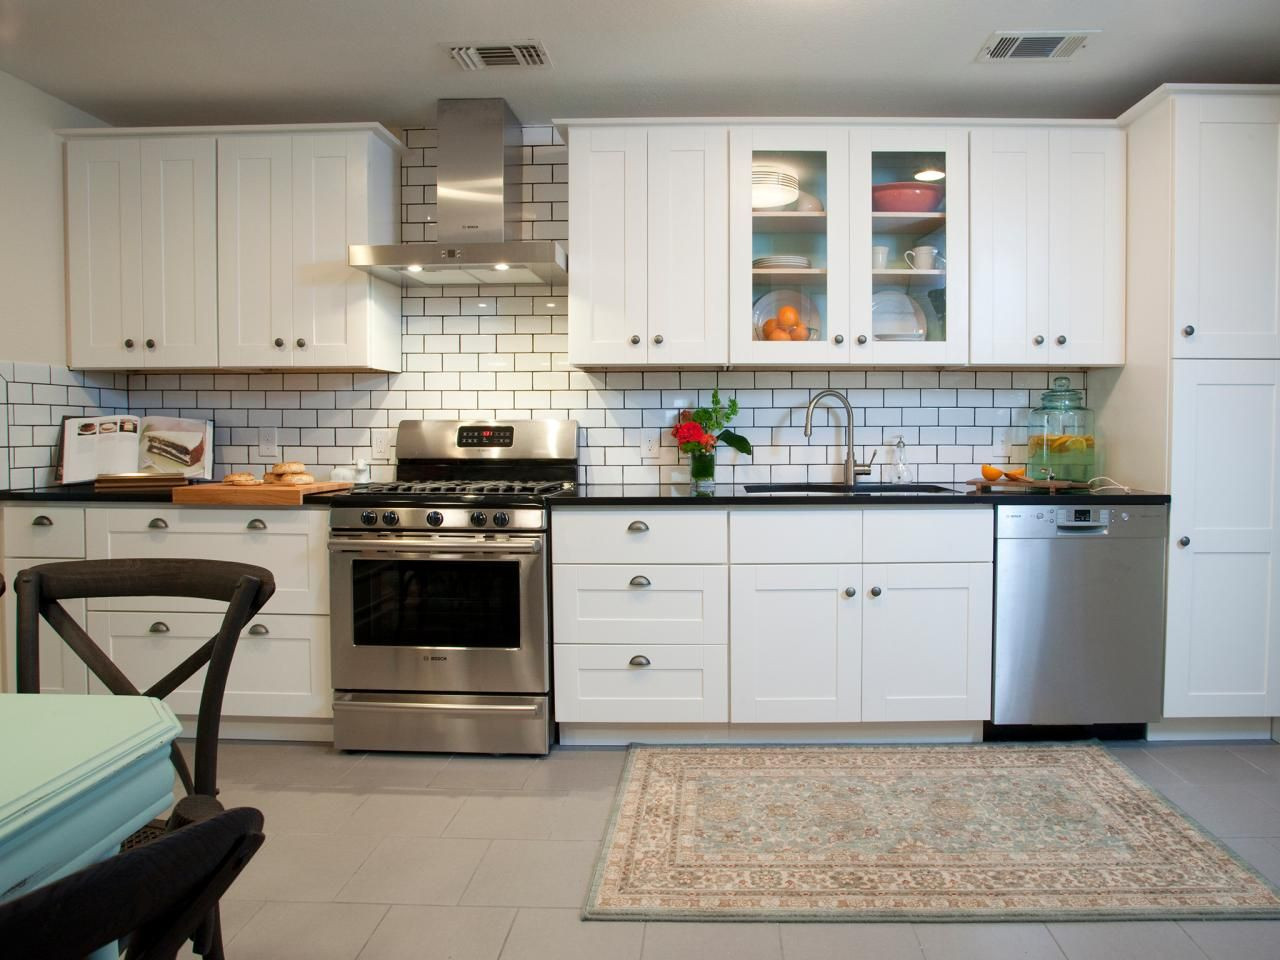 White Kitchen Tile
 Dress Your Kitchen In Style With Some White Subway Tiles